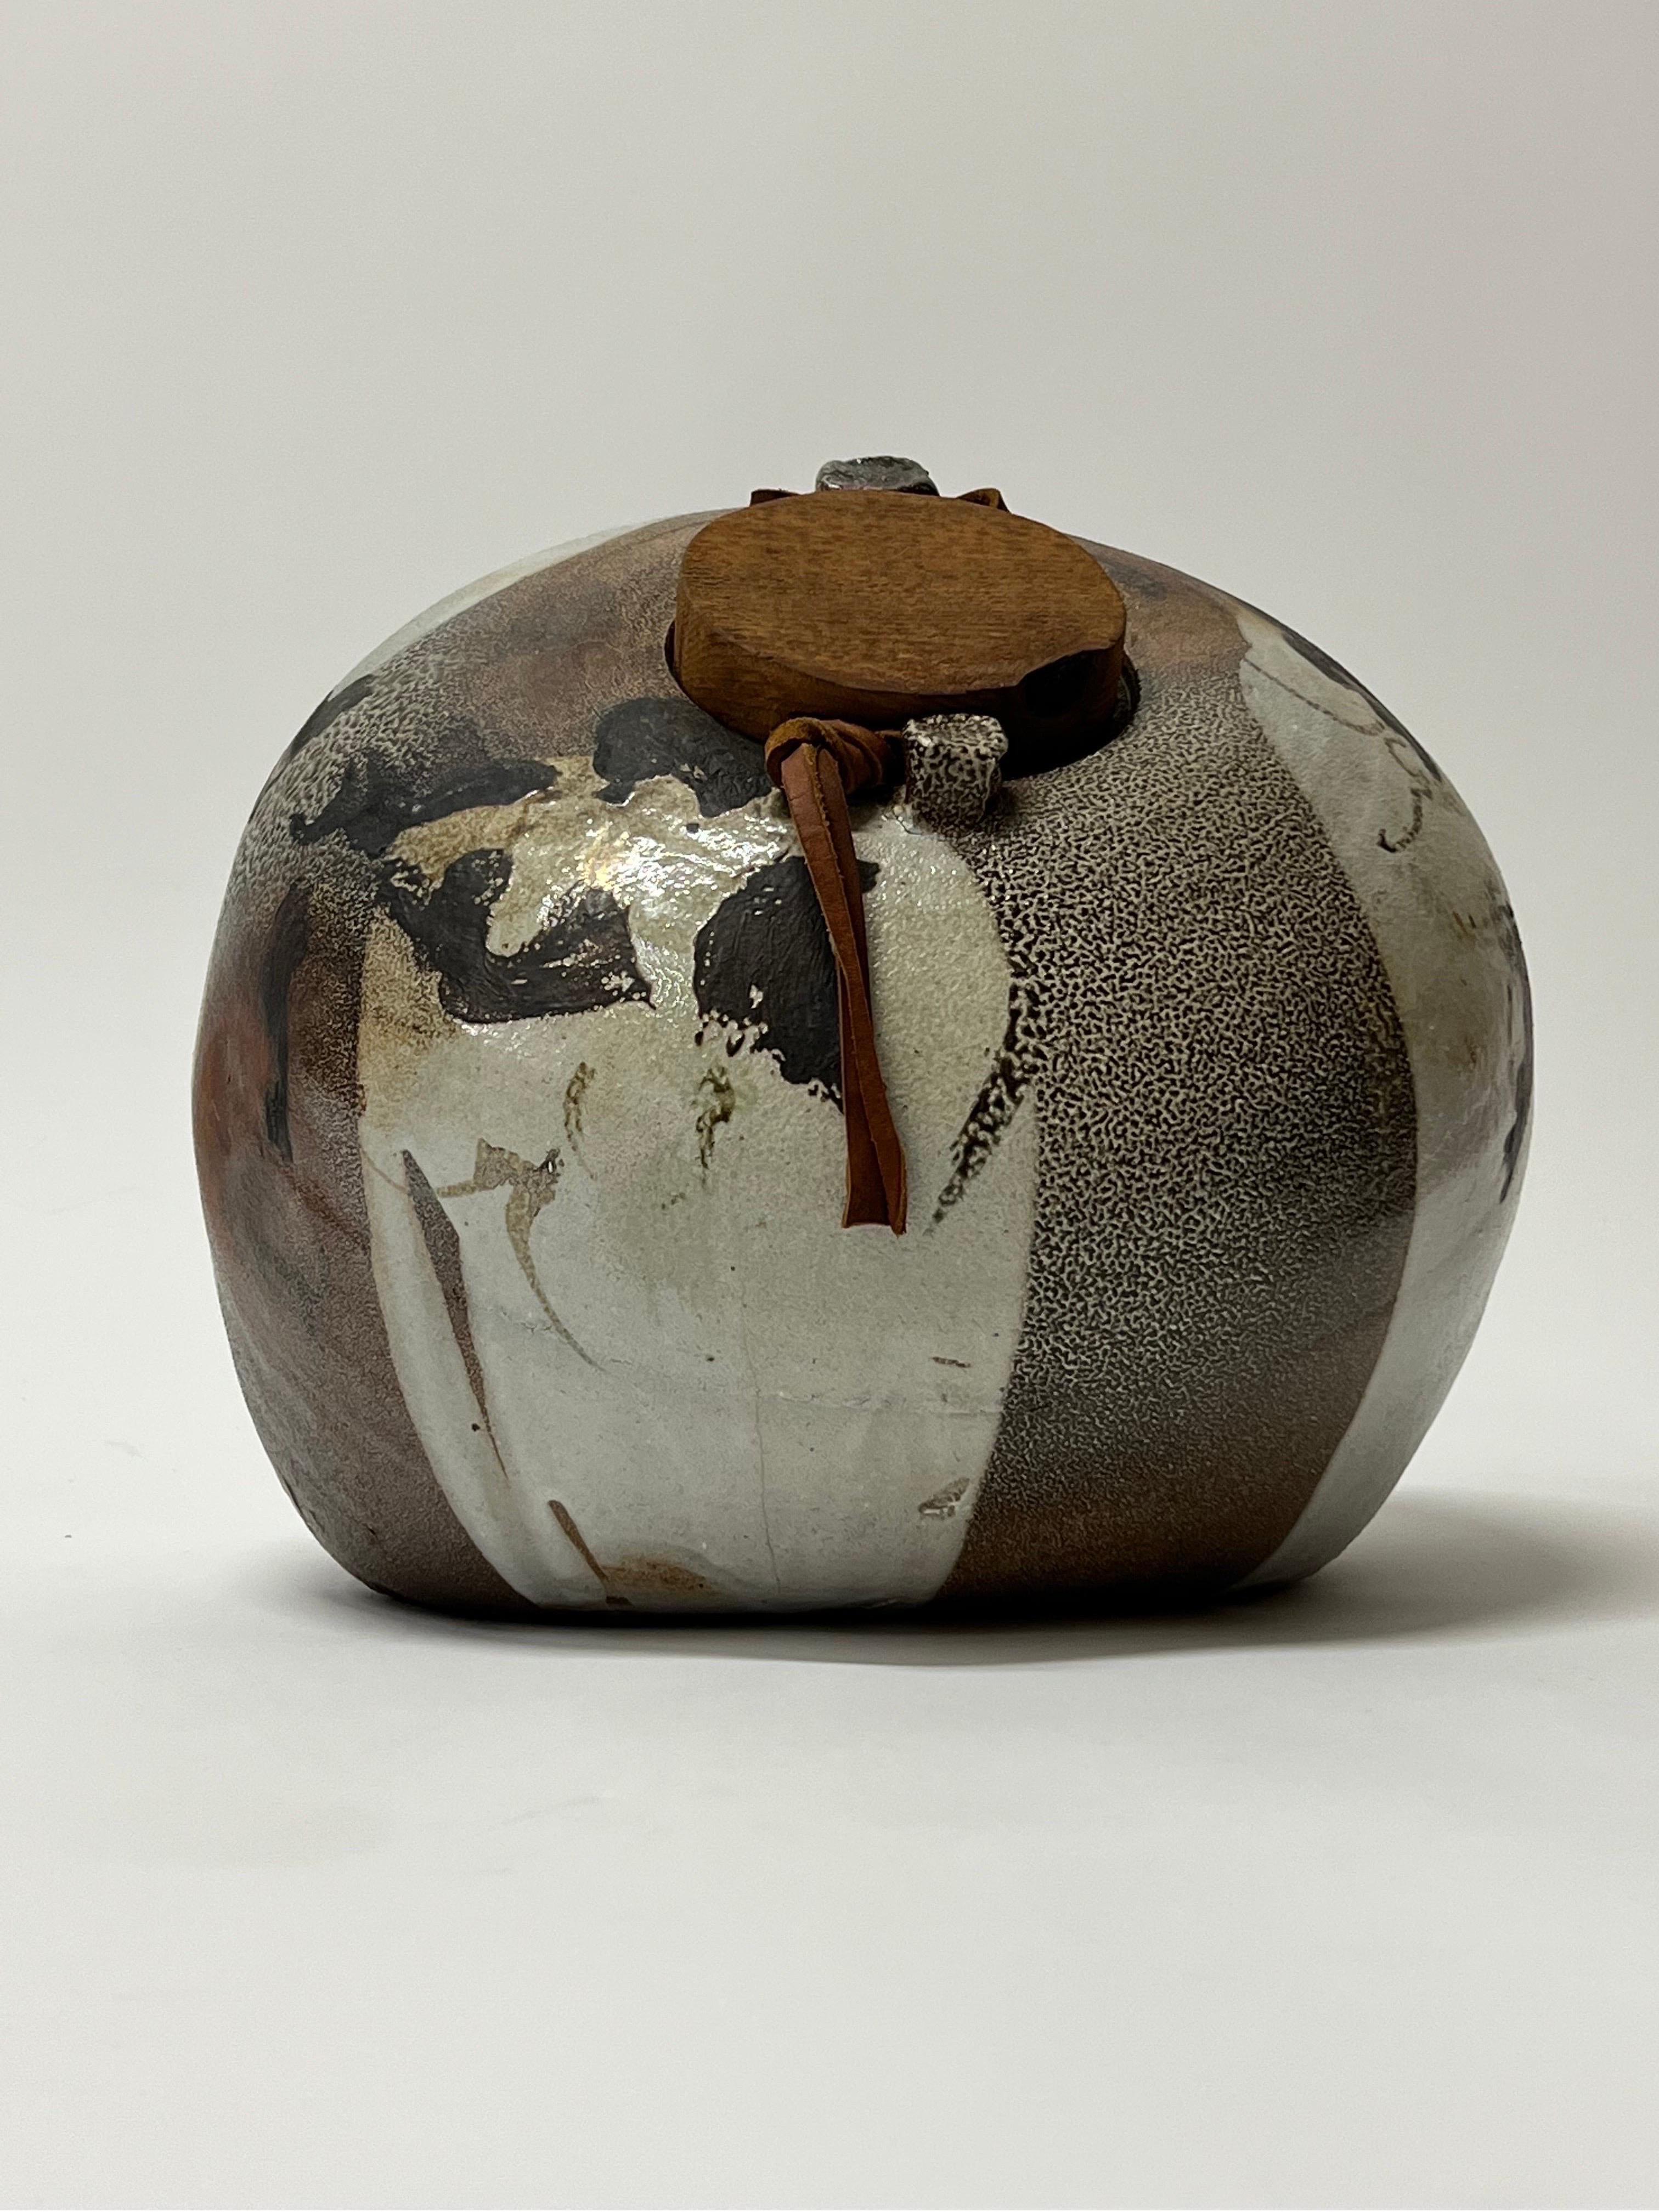 Amazing large lidded vessel by well listed potter, Sandra Johnstone c1970s. Johnstone (1936-1991) studied with Peter Voulkos at UC Berkeley in the 1950s. In addition Johnstone also studied with Paul Soldner. She eventually went on to build her own